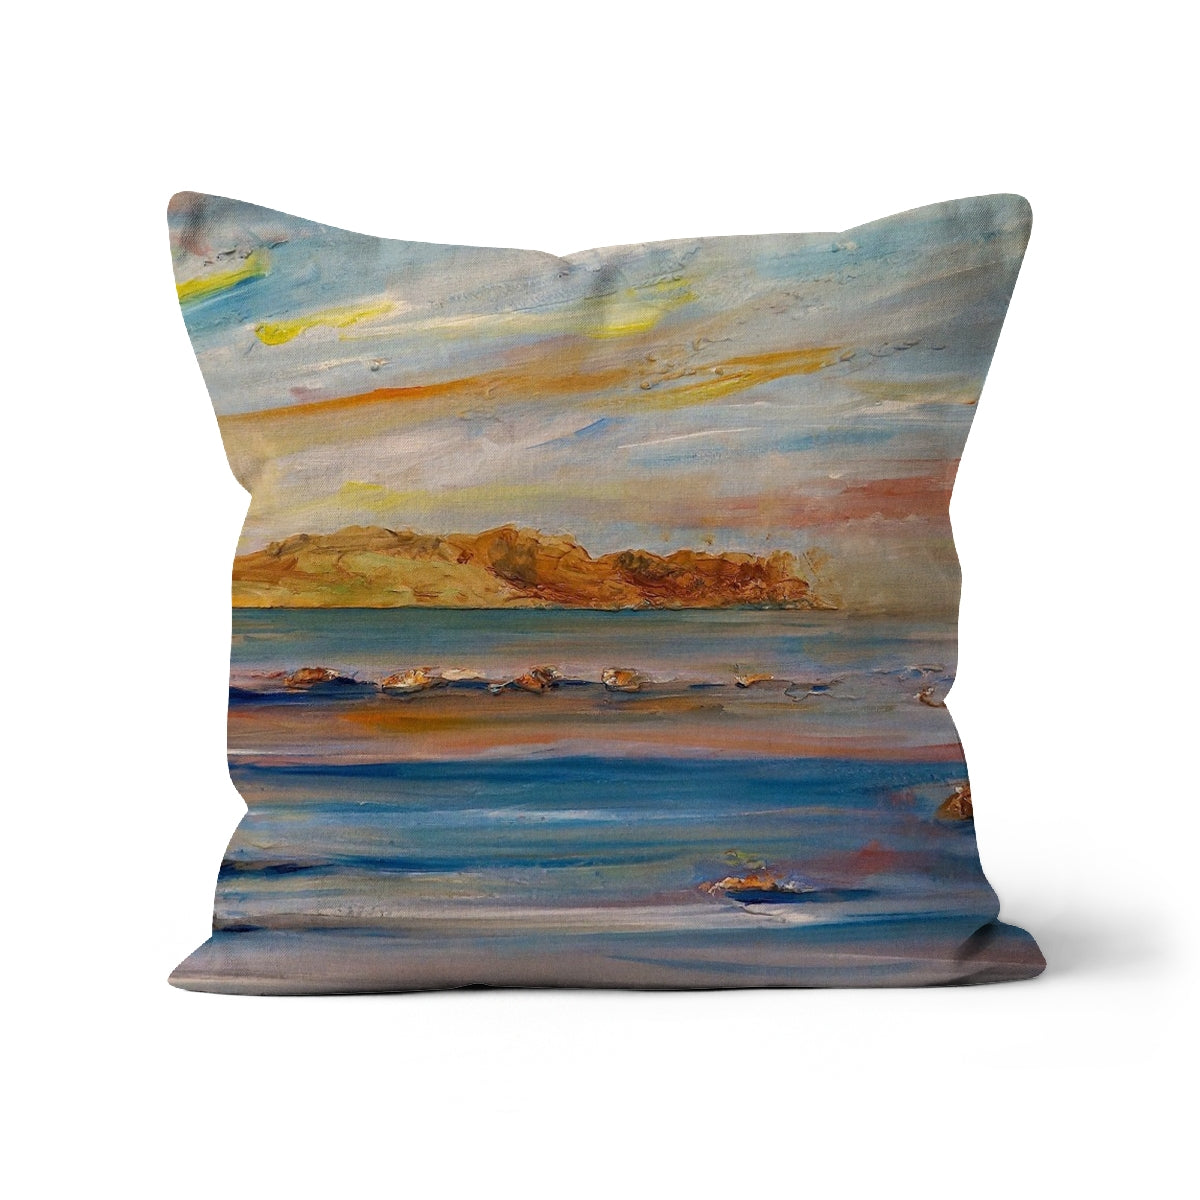 Tiree Dawn Art Gifts Cushion-Cushions-Hebridean Islands Art Gallery-Faux Suede-22"x22"-Paintings, Prints, Homeware, Art Gifts From Scotland By Scottish Artist Kevin Hunter